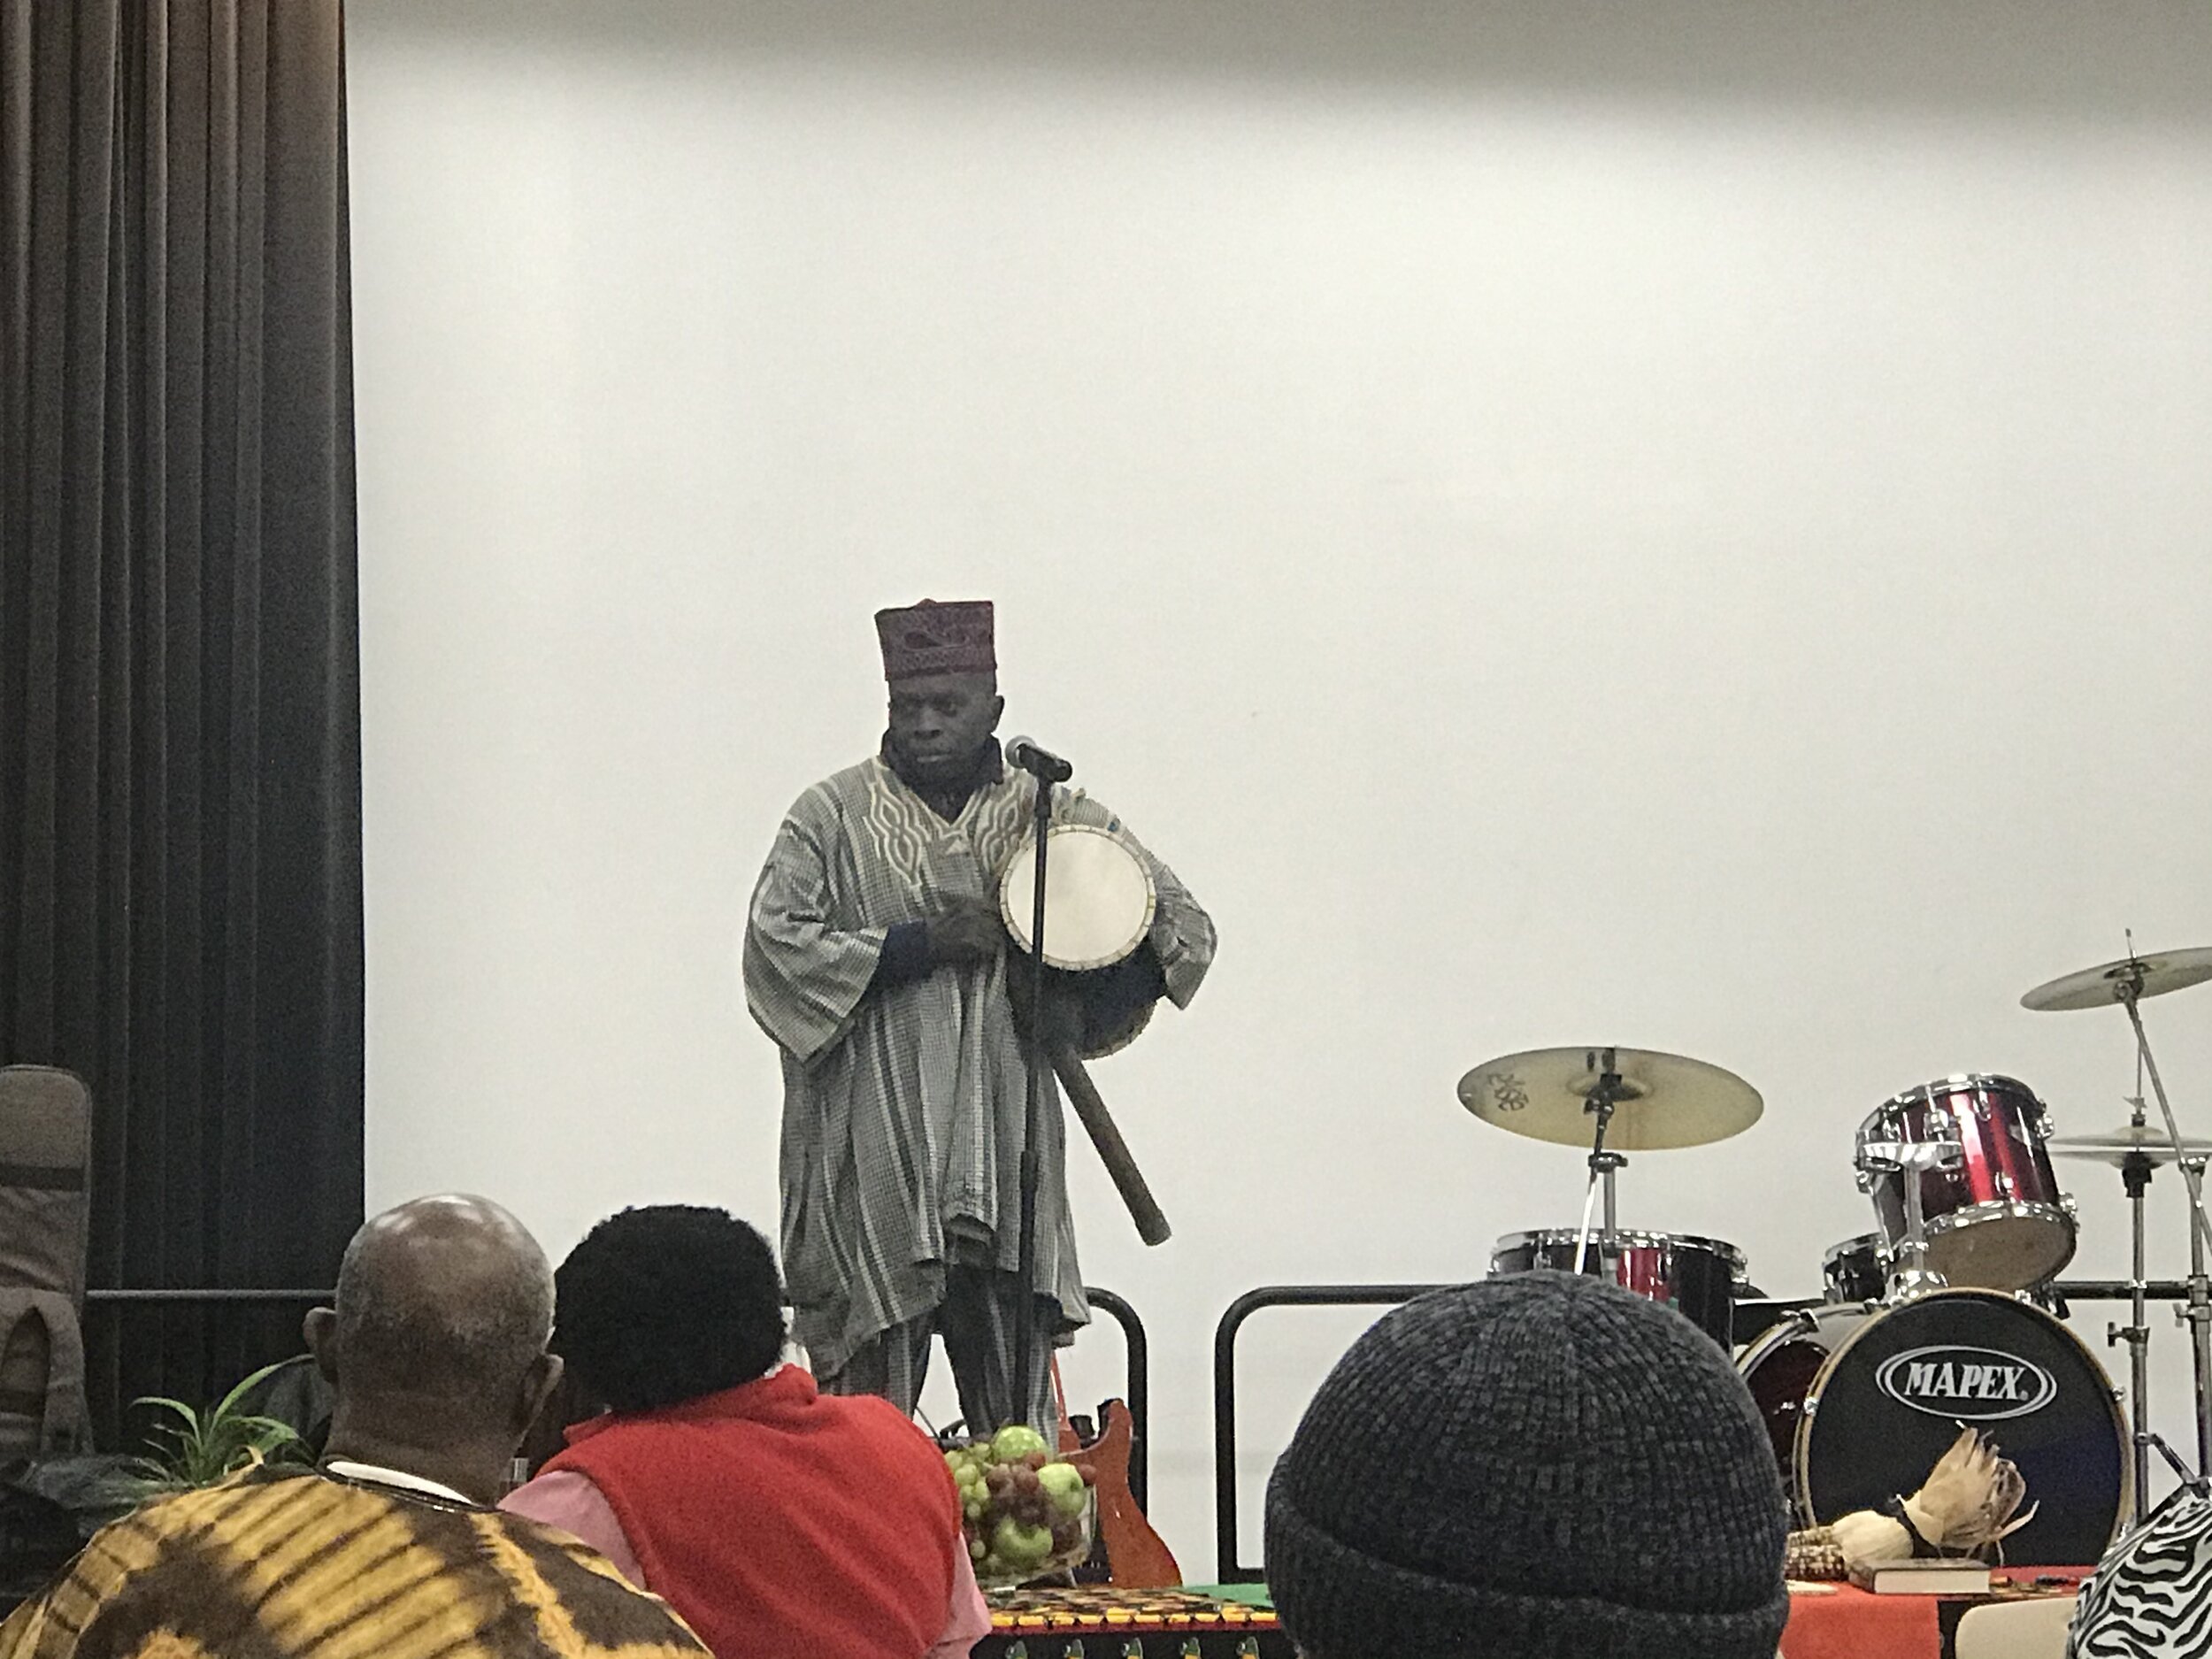  Master Drummer, Joseph Ngwa, plays traditional drums to begin the Kwanzaa ceremony. (Zamir Courtney/The Black Explosion)&nbsp;  